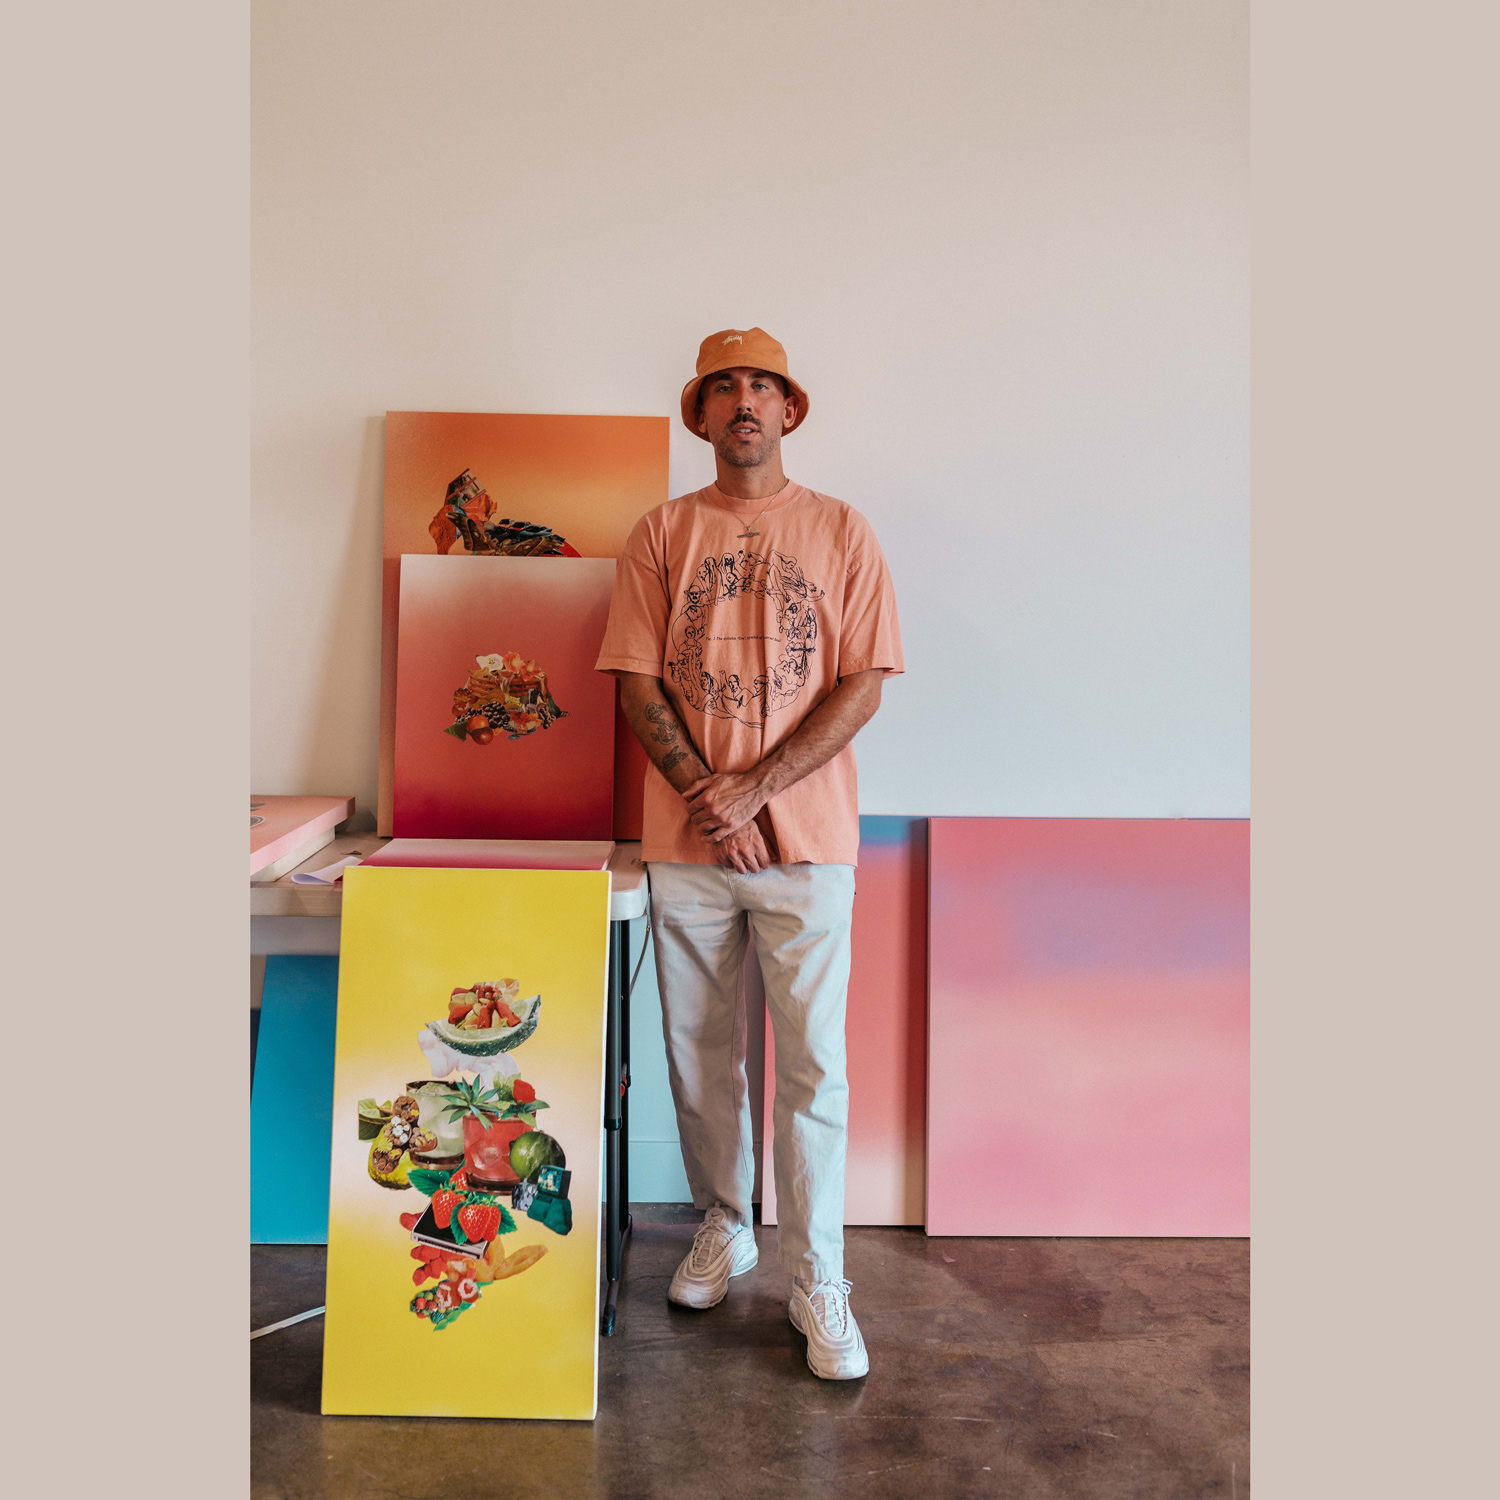 A man stands in front of a group of colorful art canvases